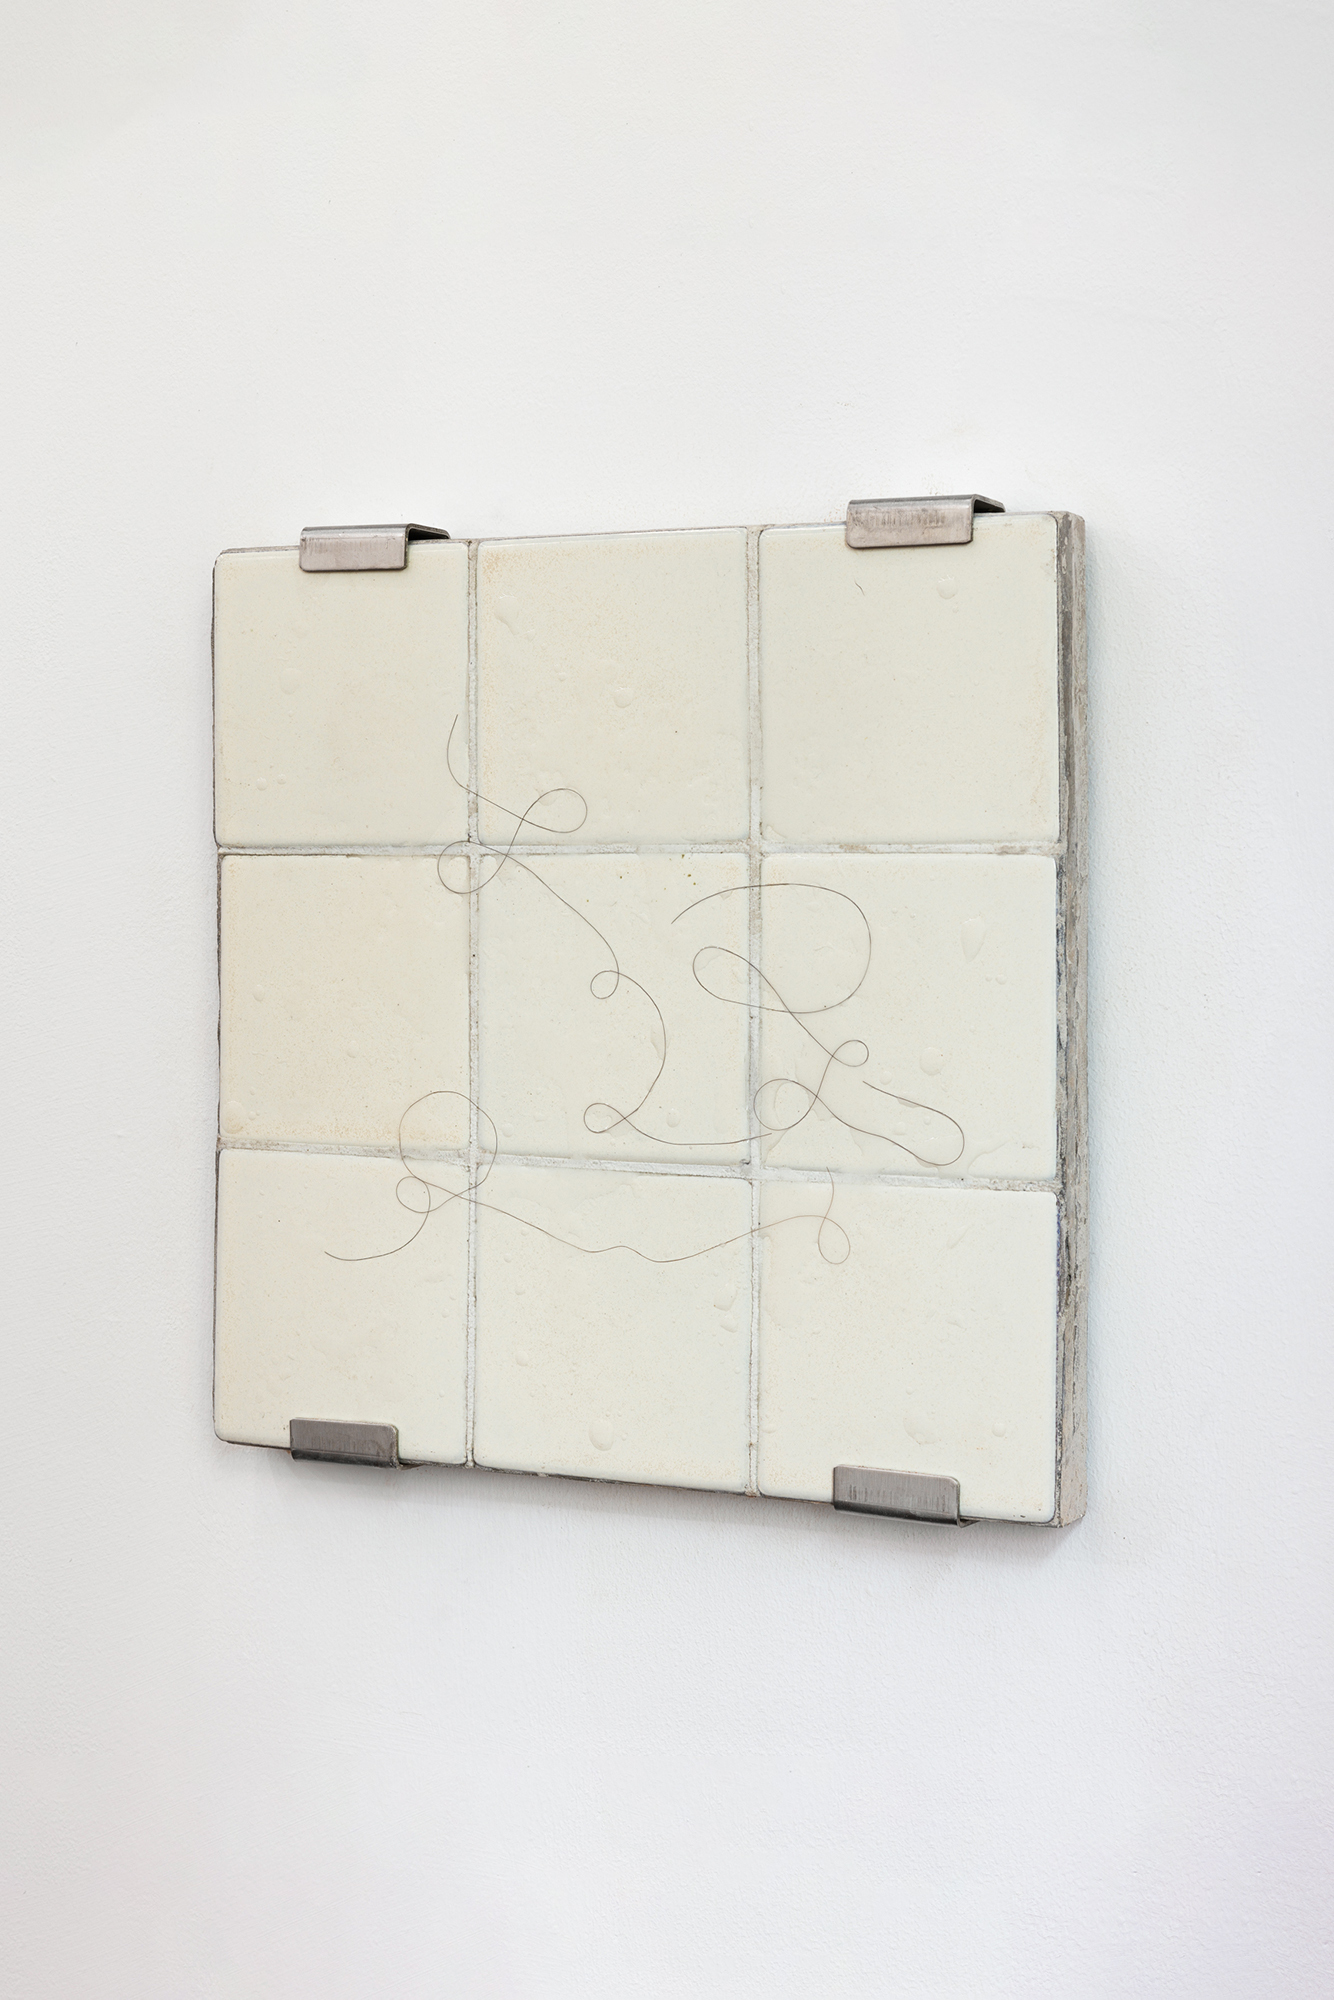 Notes, 2023, Cement, handmade tiles, epoxy colored sand, chicken wire, resin, artist's hair, 29.5 Ã— 29.5 Ã— 2.5 cm